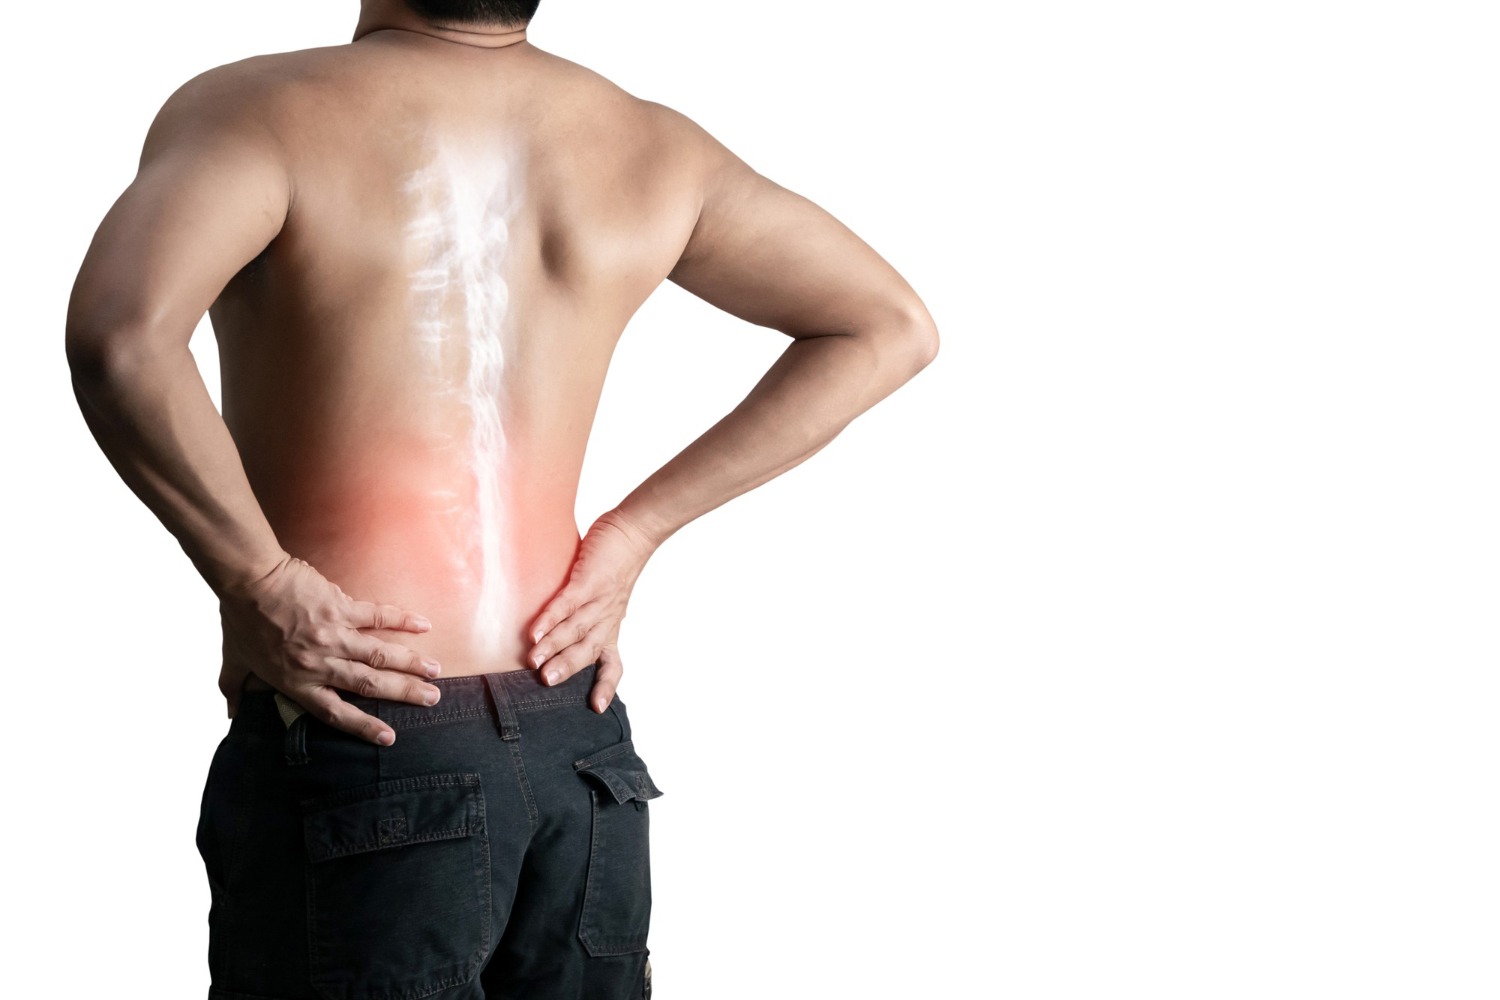 Your search for the best lower back pain treatment in Clifton ends here! Dial (973)-798-1787 today for instant relief.